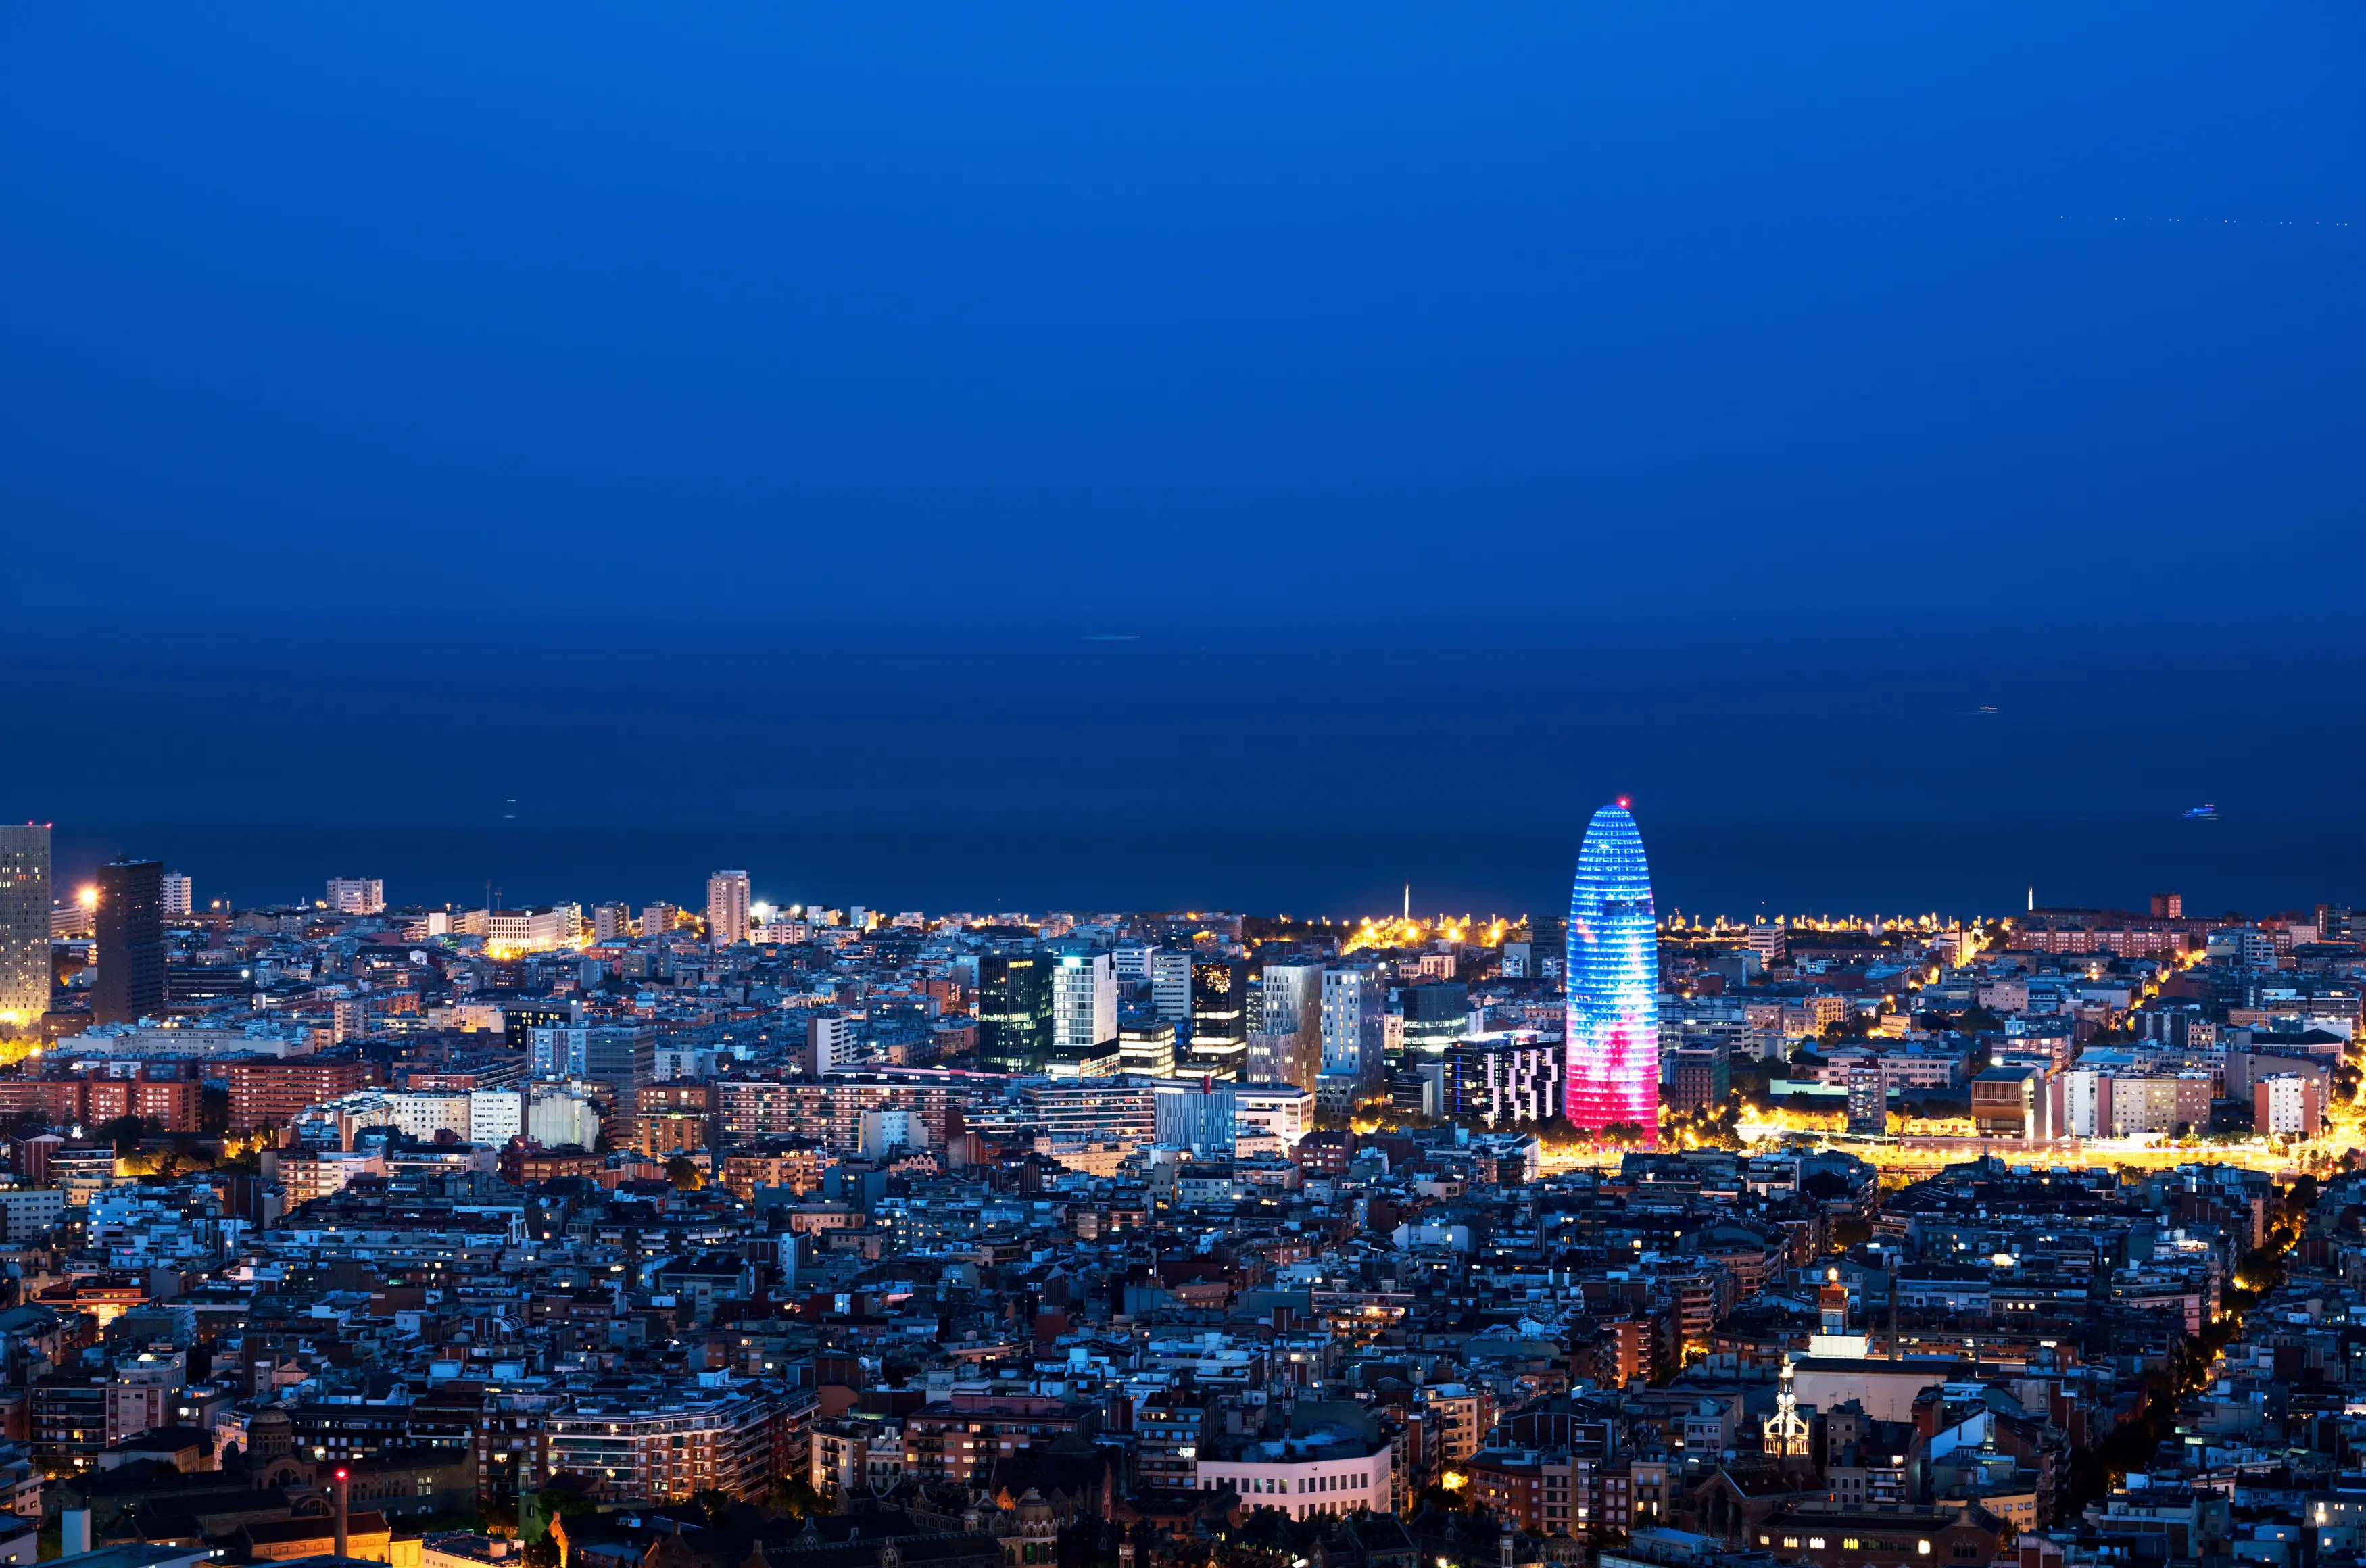 Things to do in Barcelona at night